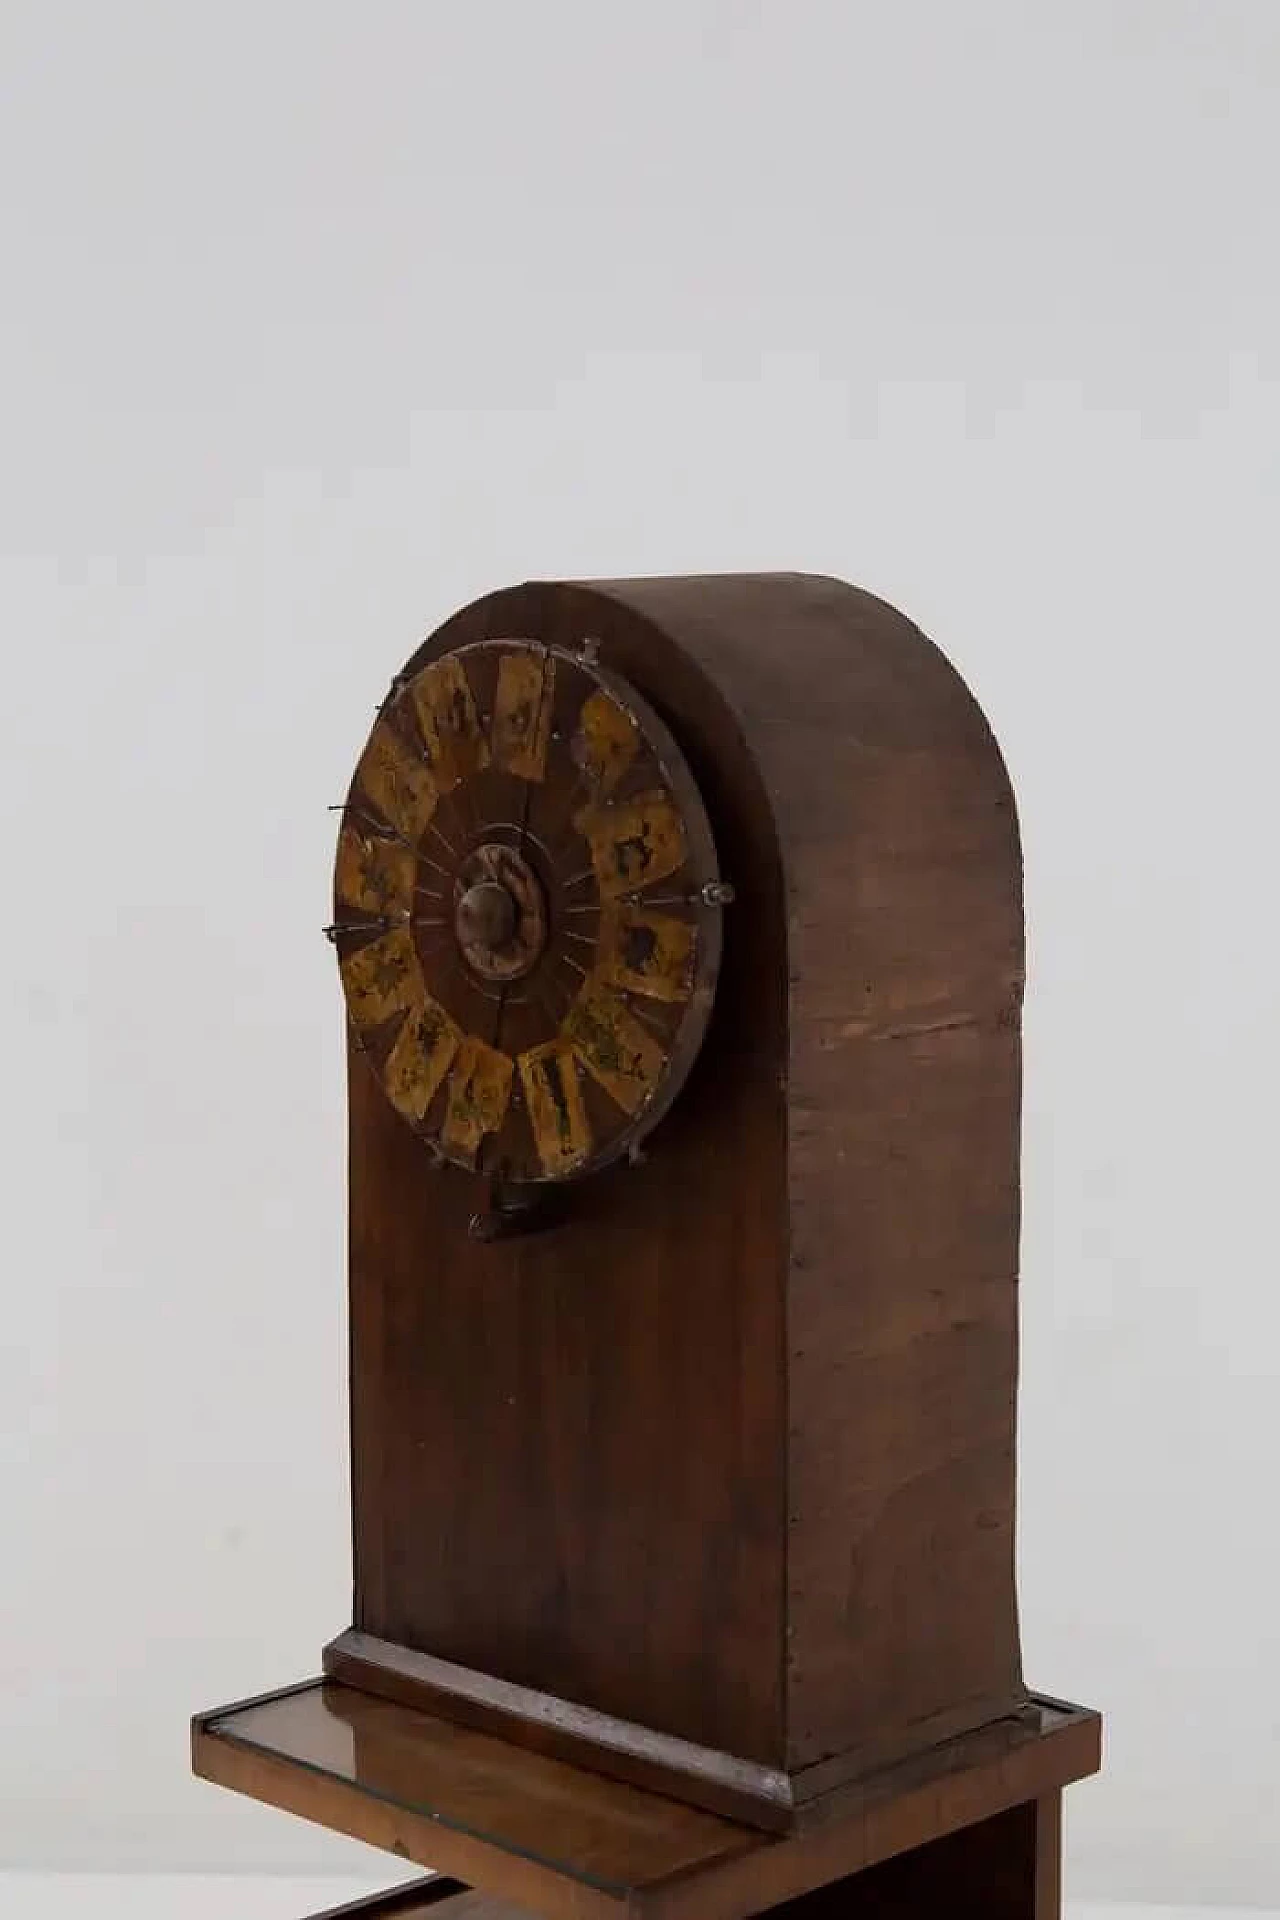 Wooden roulette wheel with applied figures, 1830 1